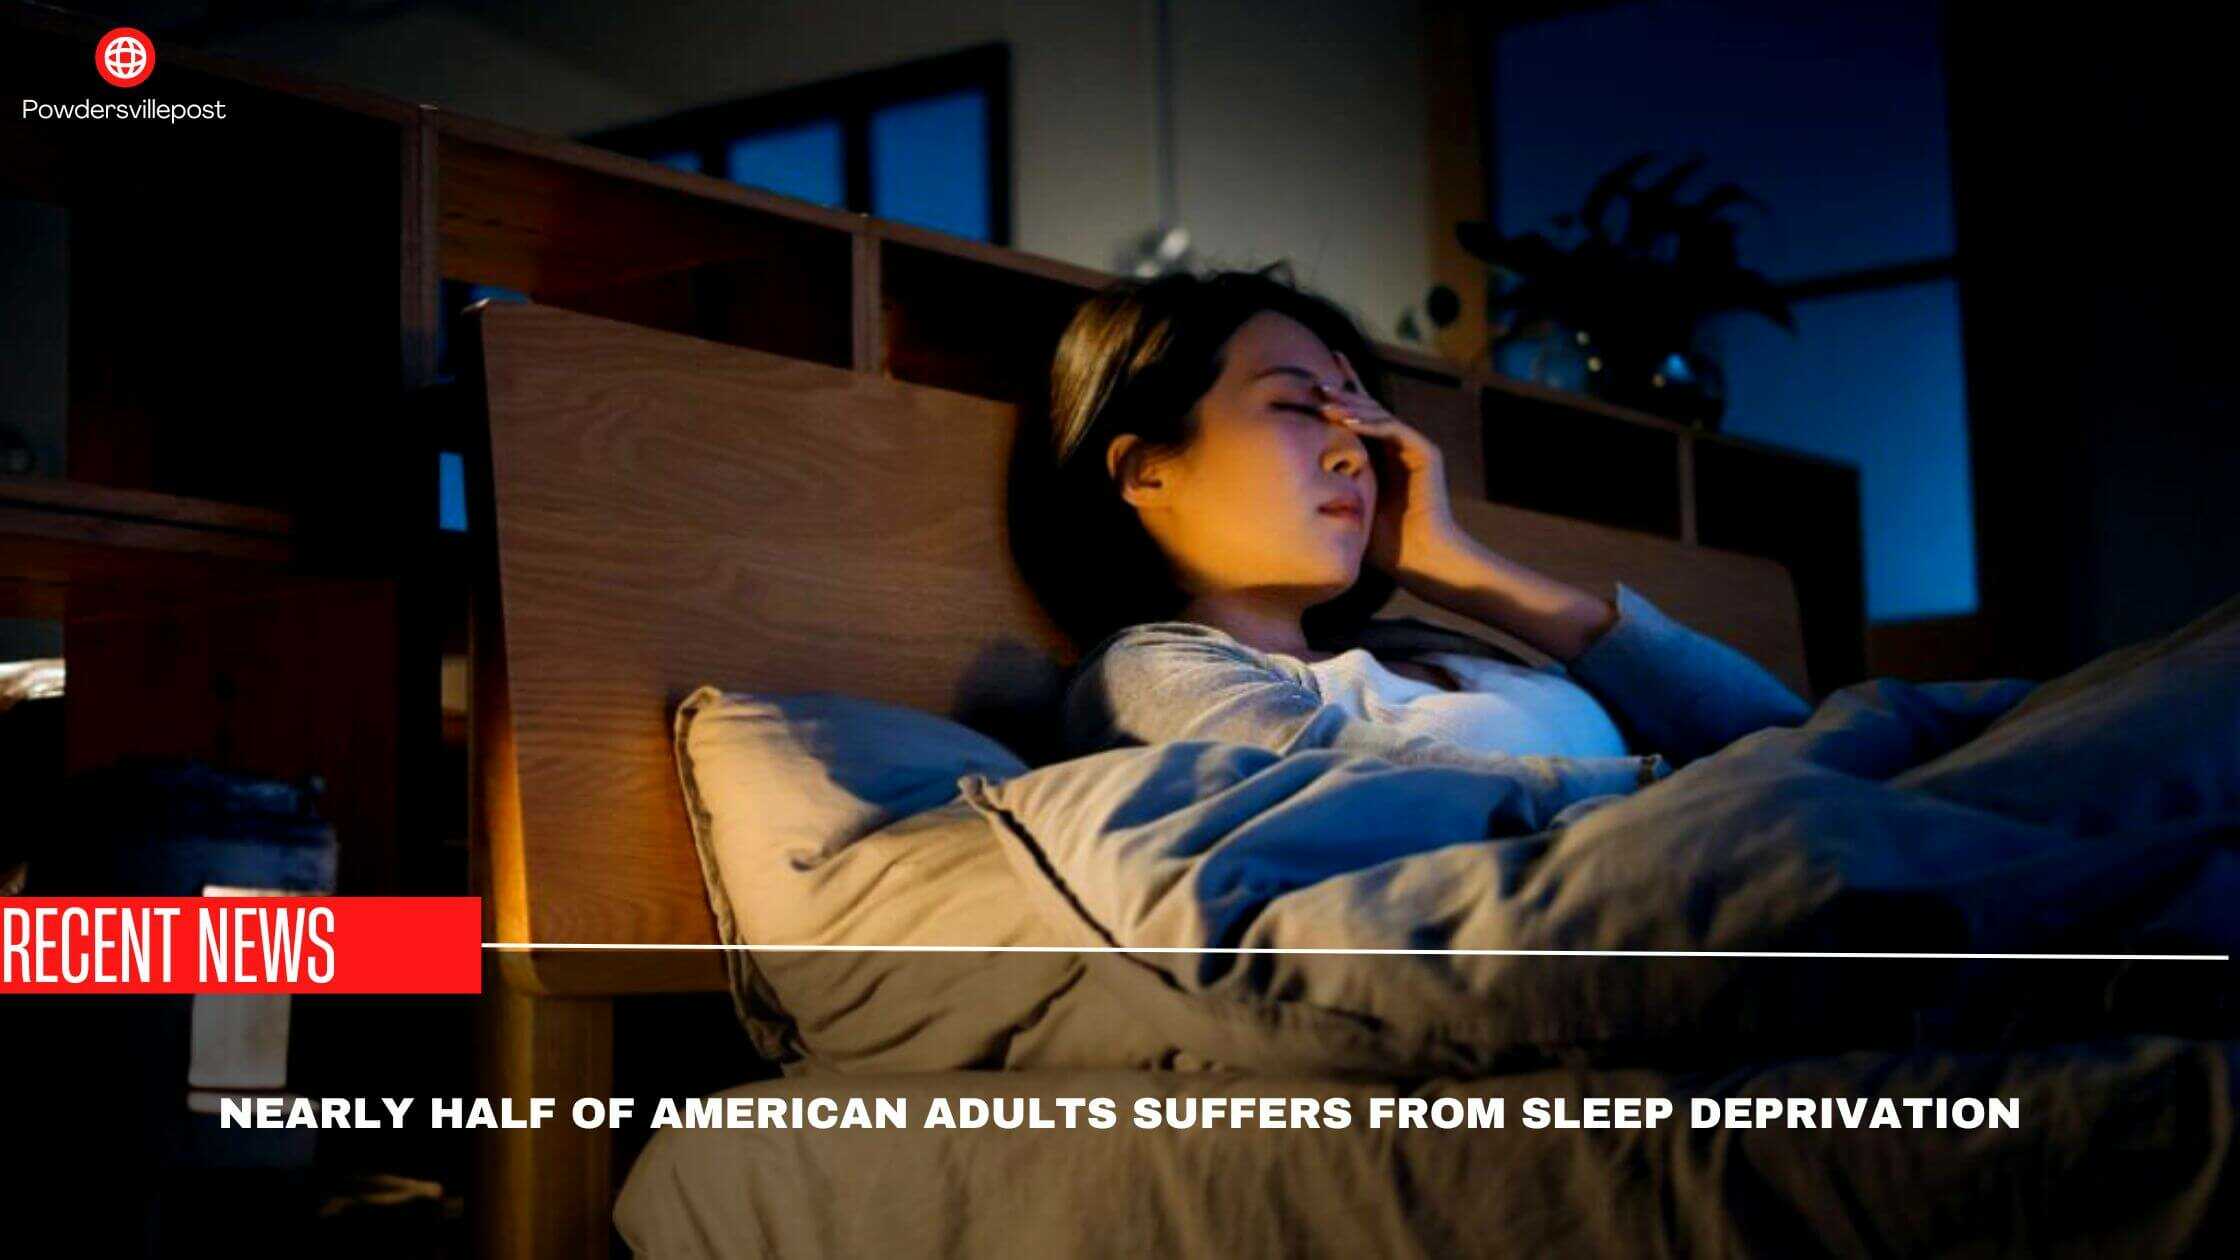 Nearly Half Of American Adults Suffers From Sleep Deprivation- Study Finds